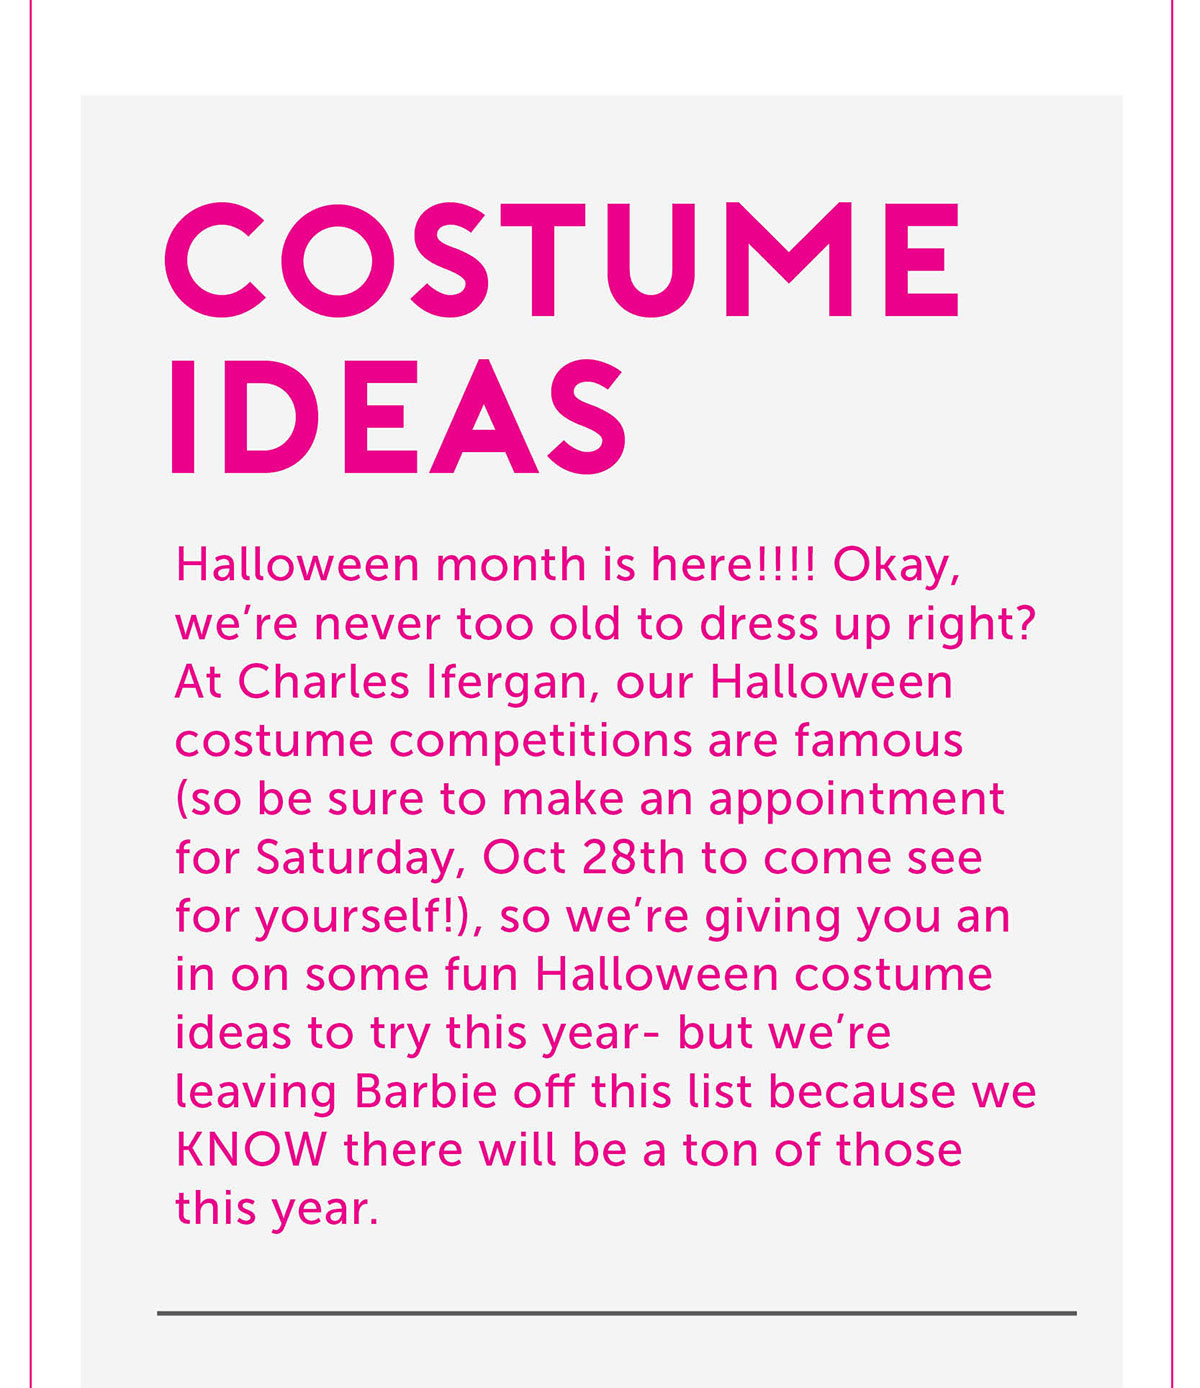 Costume ideas Halloween month is here!!!! Okay, we’re never too old to dress up right? At Charles Ifergan, our Halloween costume competitions are famous (so be sure to make an appointment for Saturday, Oct 28th to come see for yourself!), so we’re giving you an in on some fun Halloween costume ideas to try this year- but we’re leaving Barbie off this list because we KNOW there will be a ton of those this year.